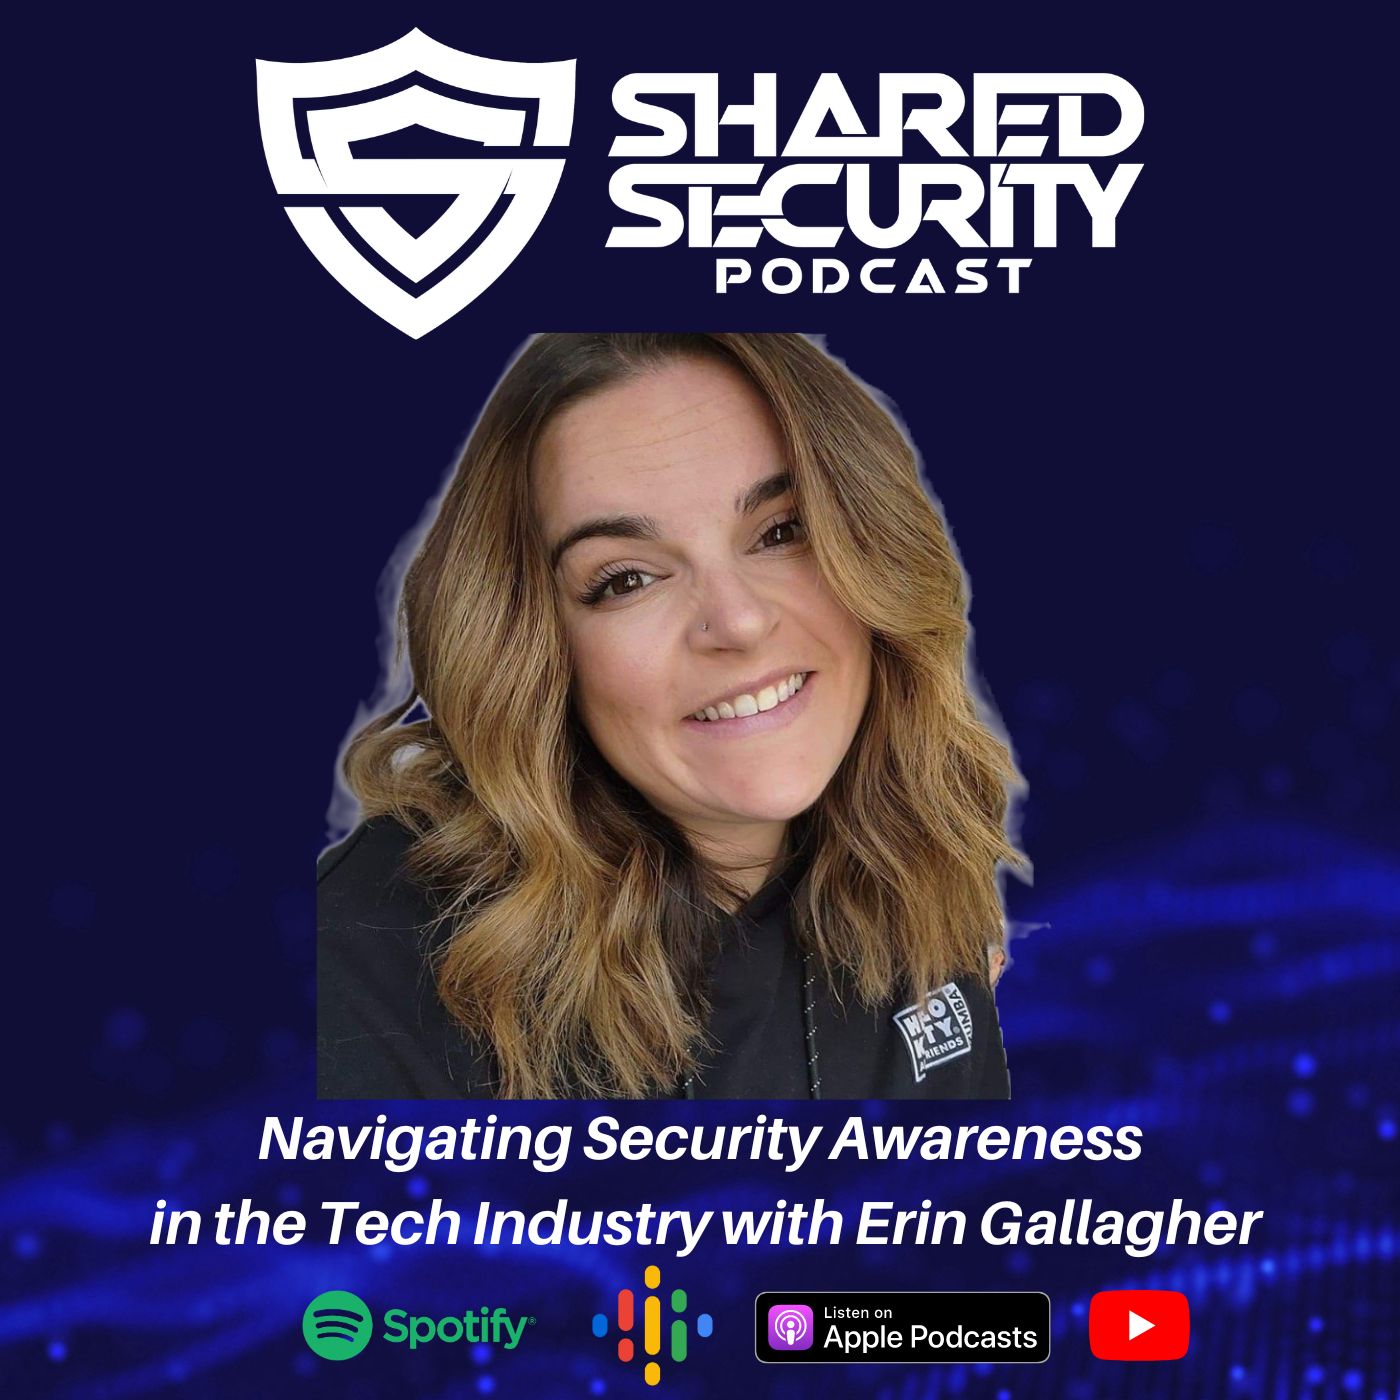 Navigating Security Awareness in the Tech Industry with Erin Gallagher